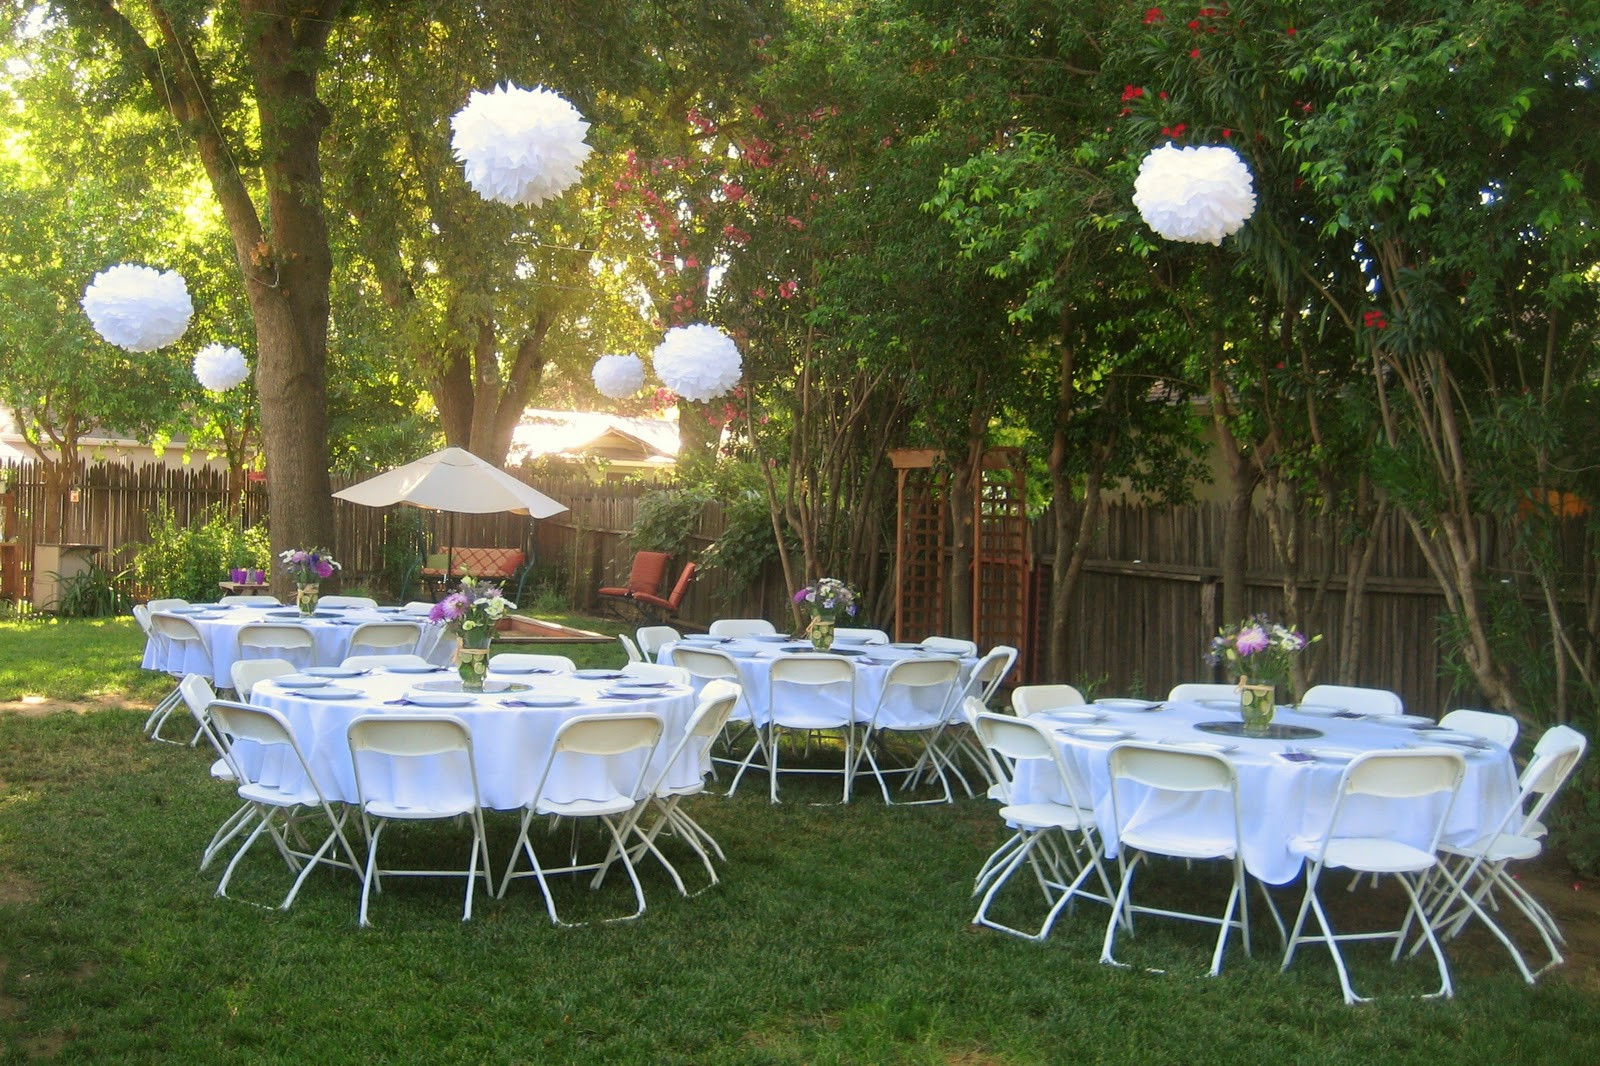 Backyard Party Decorating Ideas
 A resting place for pleted Projects Backyard Bridal